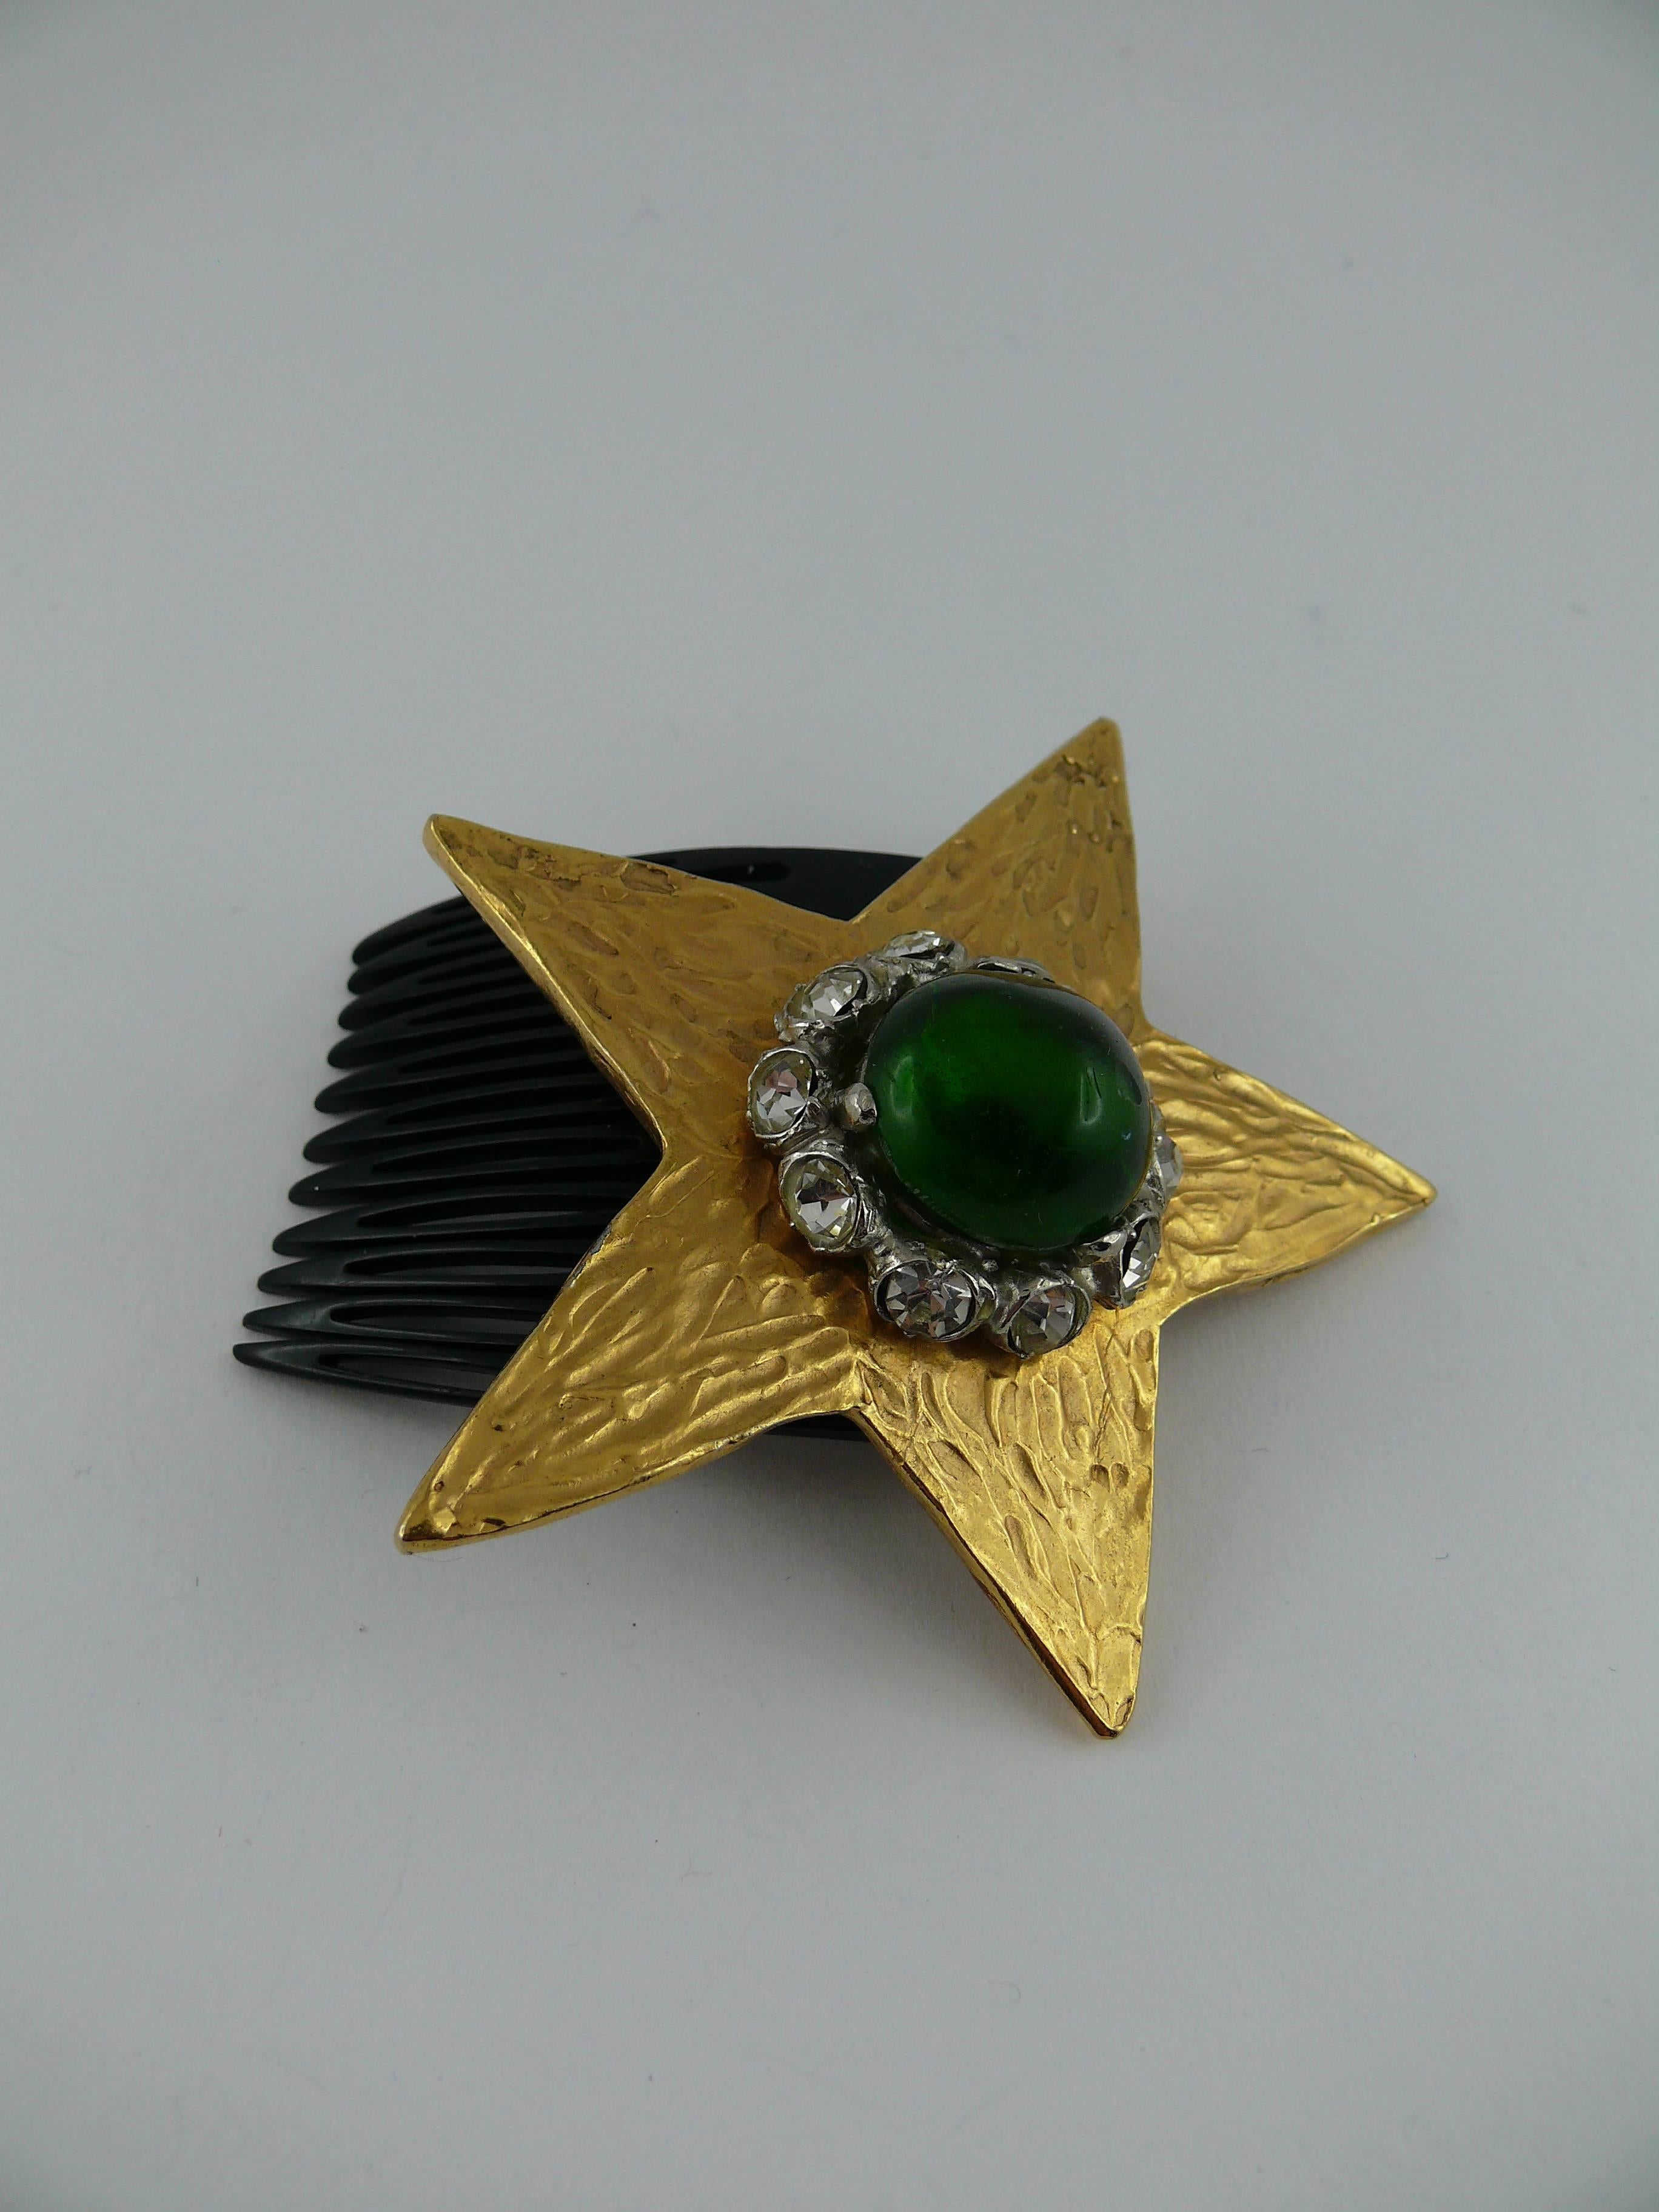 YVES SAINT LAURENT (attributed to) vintage rare hair comb featuring a textured gold tone star embellished with a green resin cabochon and white crystals.

Unsigned.
Marked "Made in France".

JEWELRY CONDITION CHART
- New or never worn :